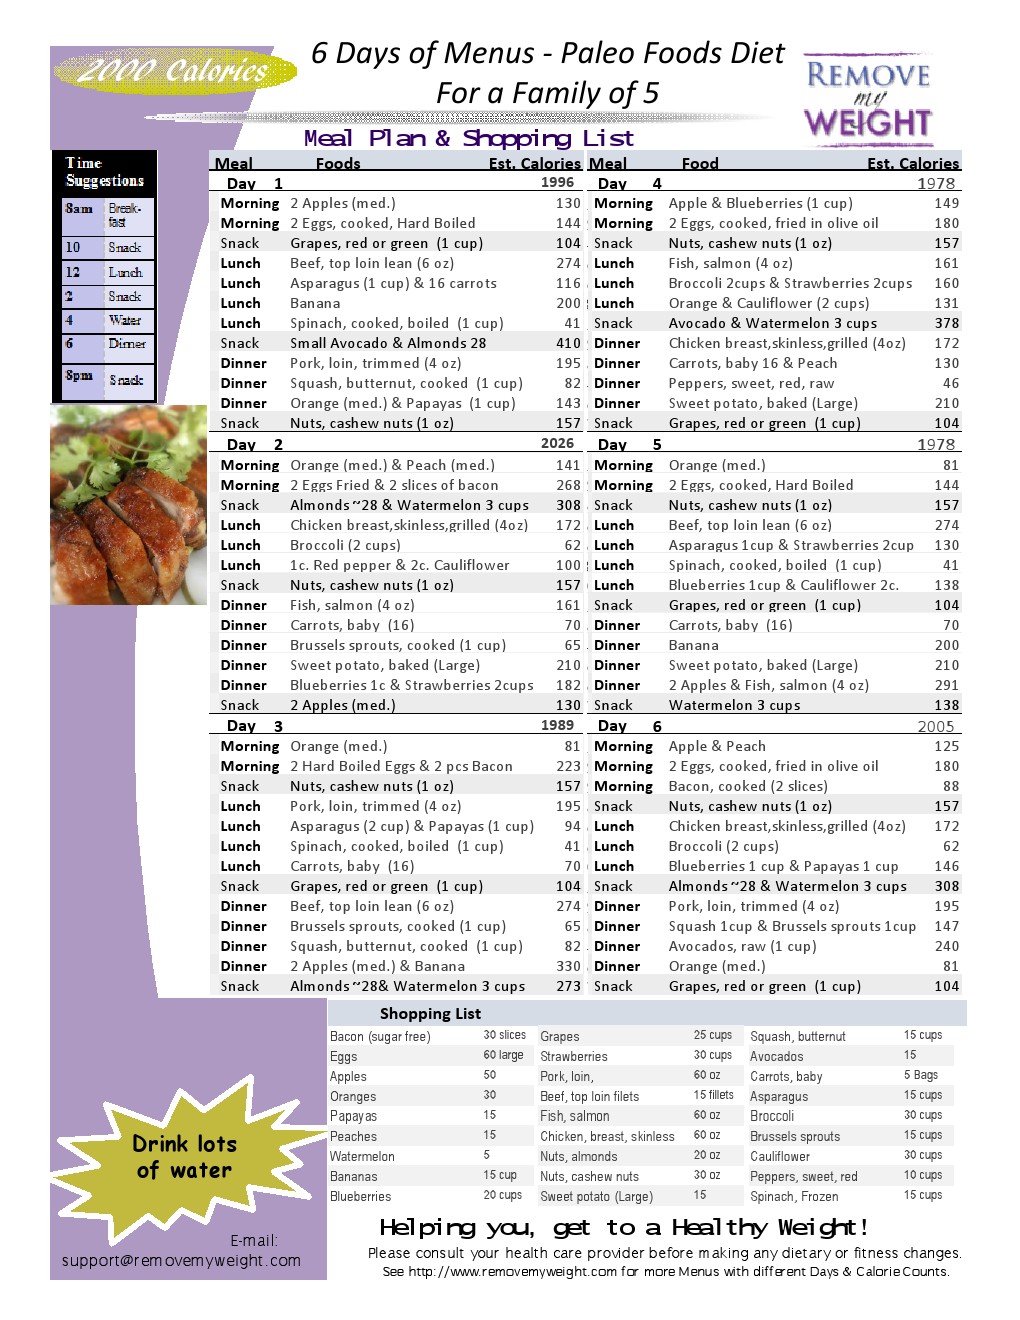 Paleo Diet 5 person 6 Day Menu Plan at 2000 Calories a day